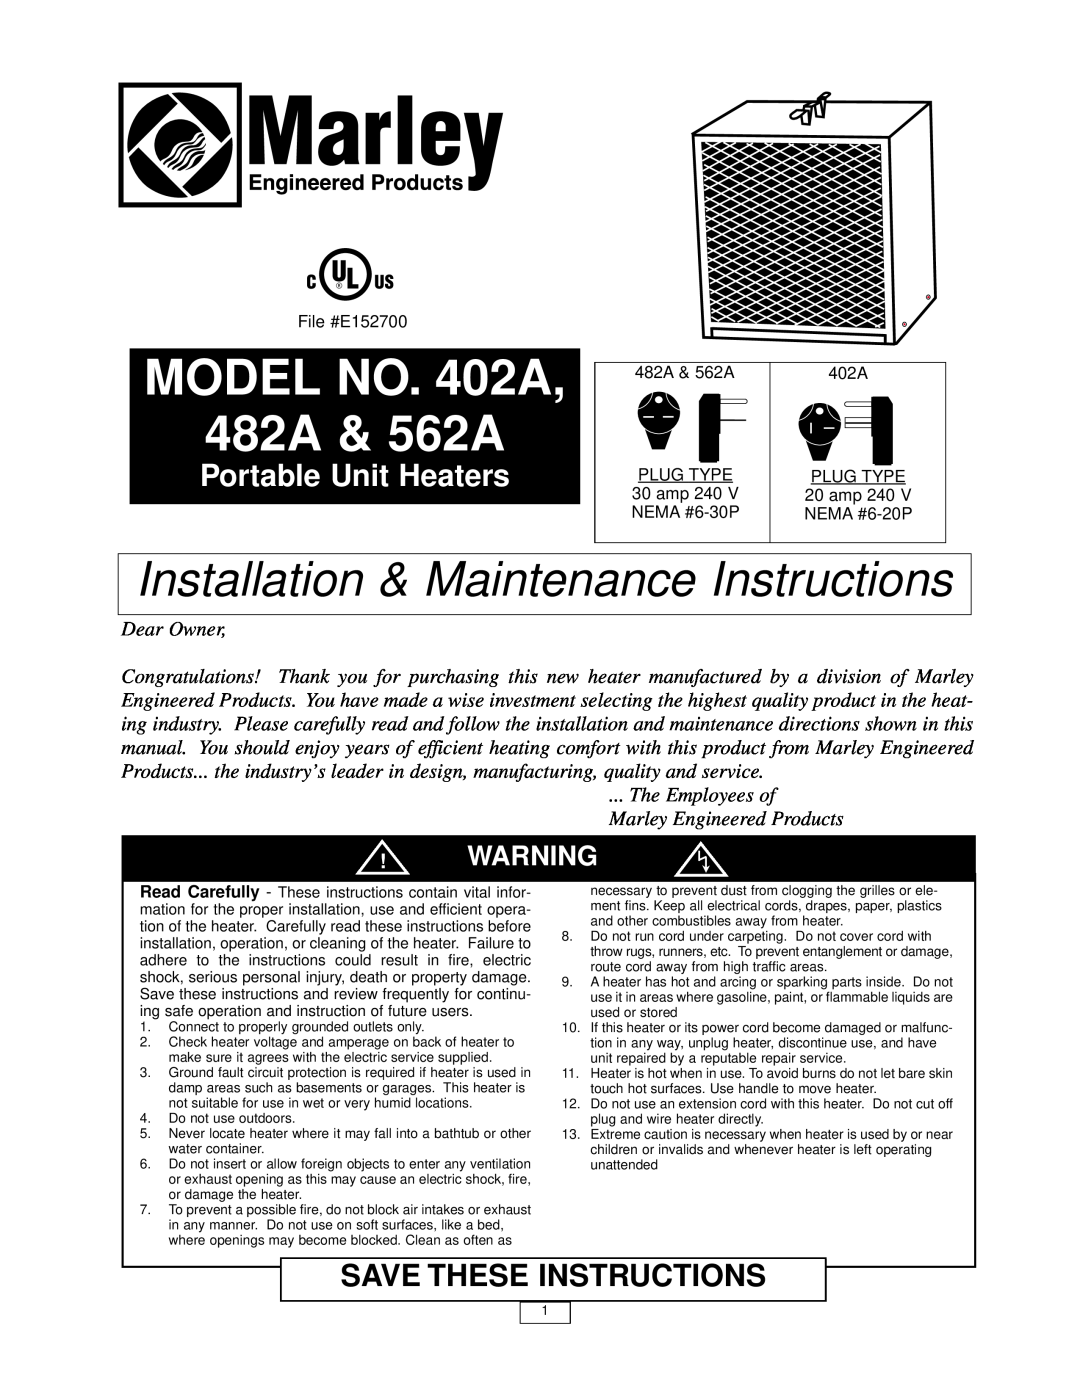 Marley Engineered Products manual File #E152700, MODEL NO. 402A 482A & 562A, Portable Unit Heaters, Dear Owner 